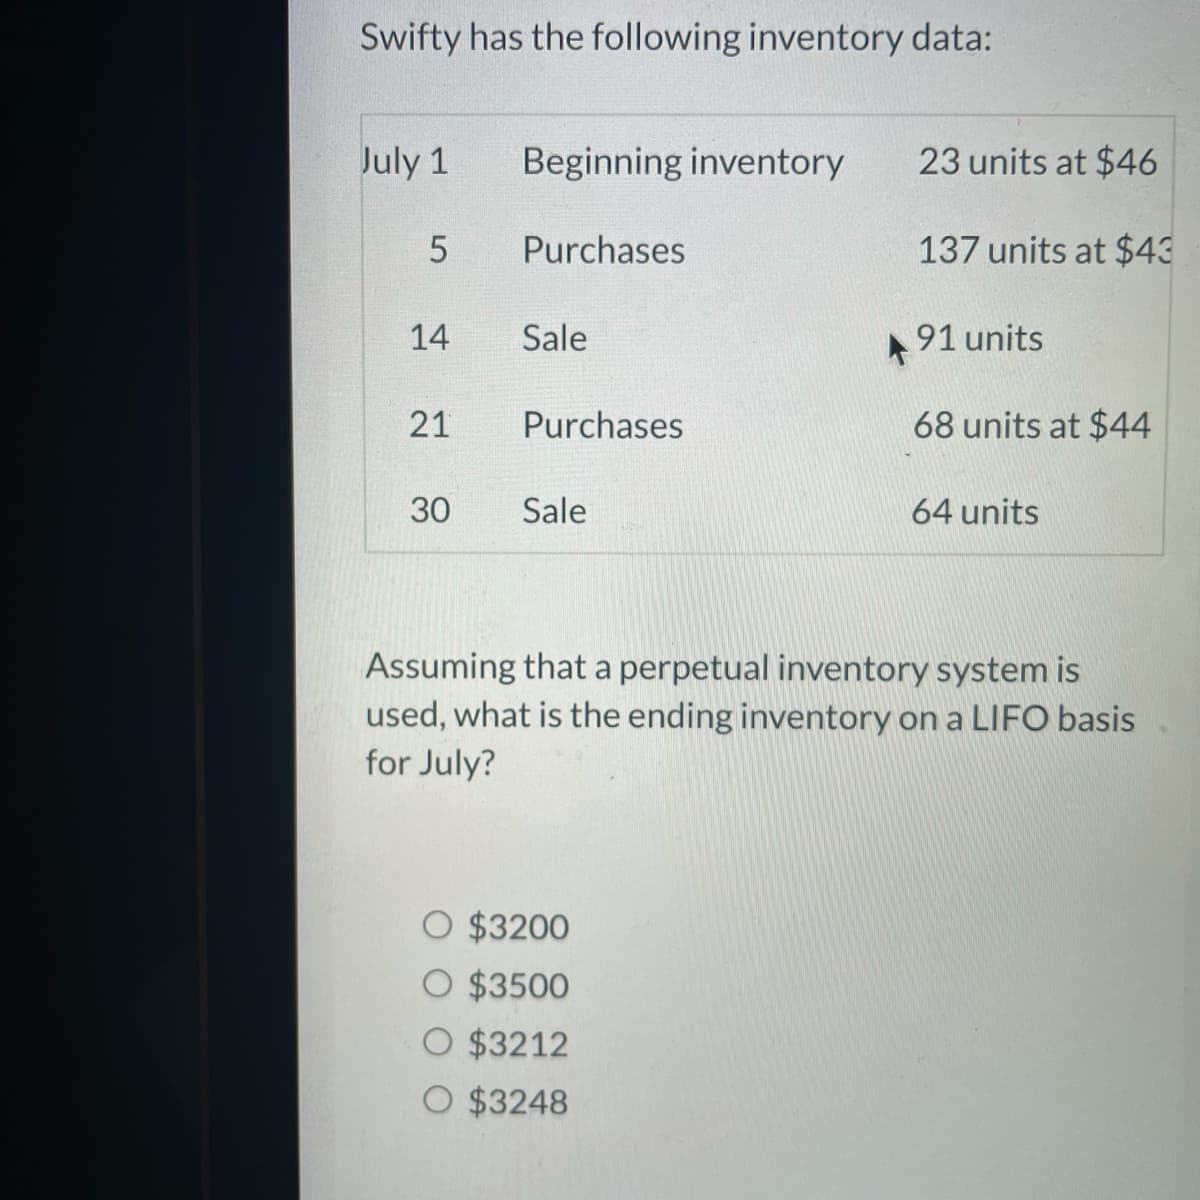 Swifty has the following inventory data:
July 1
Beginning inventory
23 units at $46
Purchases
137 units at $43
14
Sale
91 units
21
Purchases
68 units at $44
30
Sale
64 units
Assuming that a perpetual inventory system is
used, what is the ending inventory on a LIFO basis
for July?
O $3200
O $3500
O $3212
O $3248
